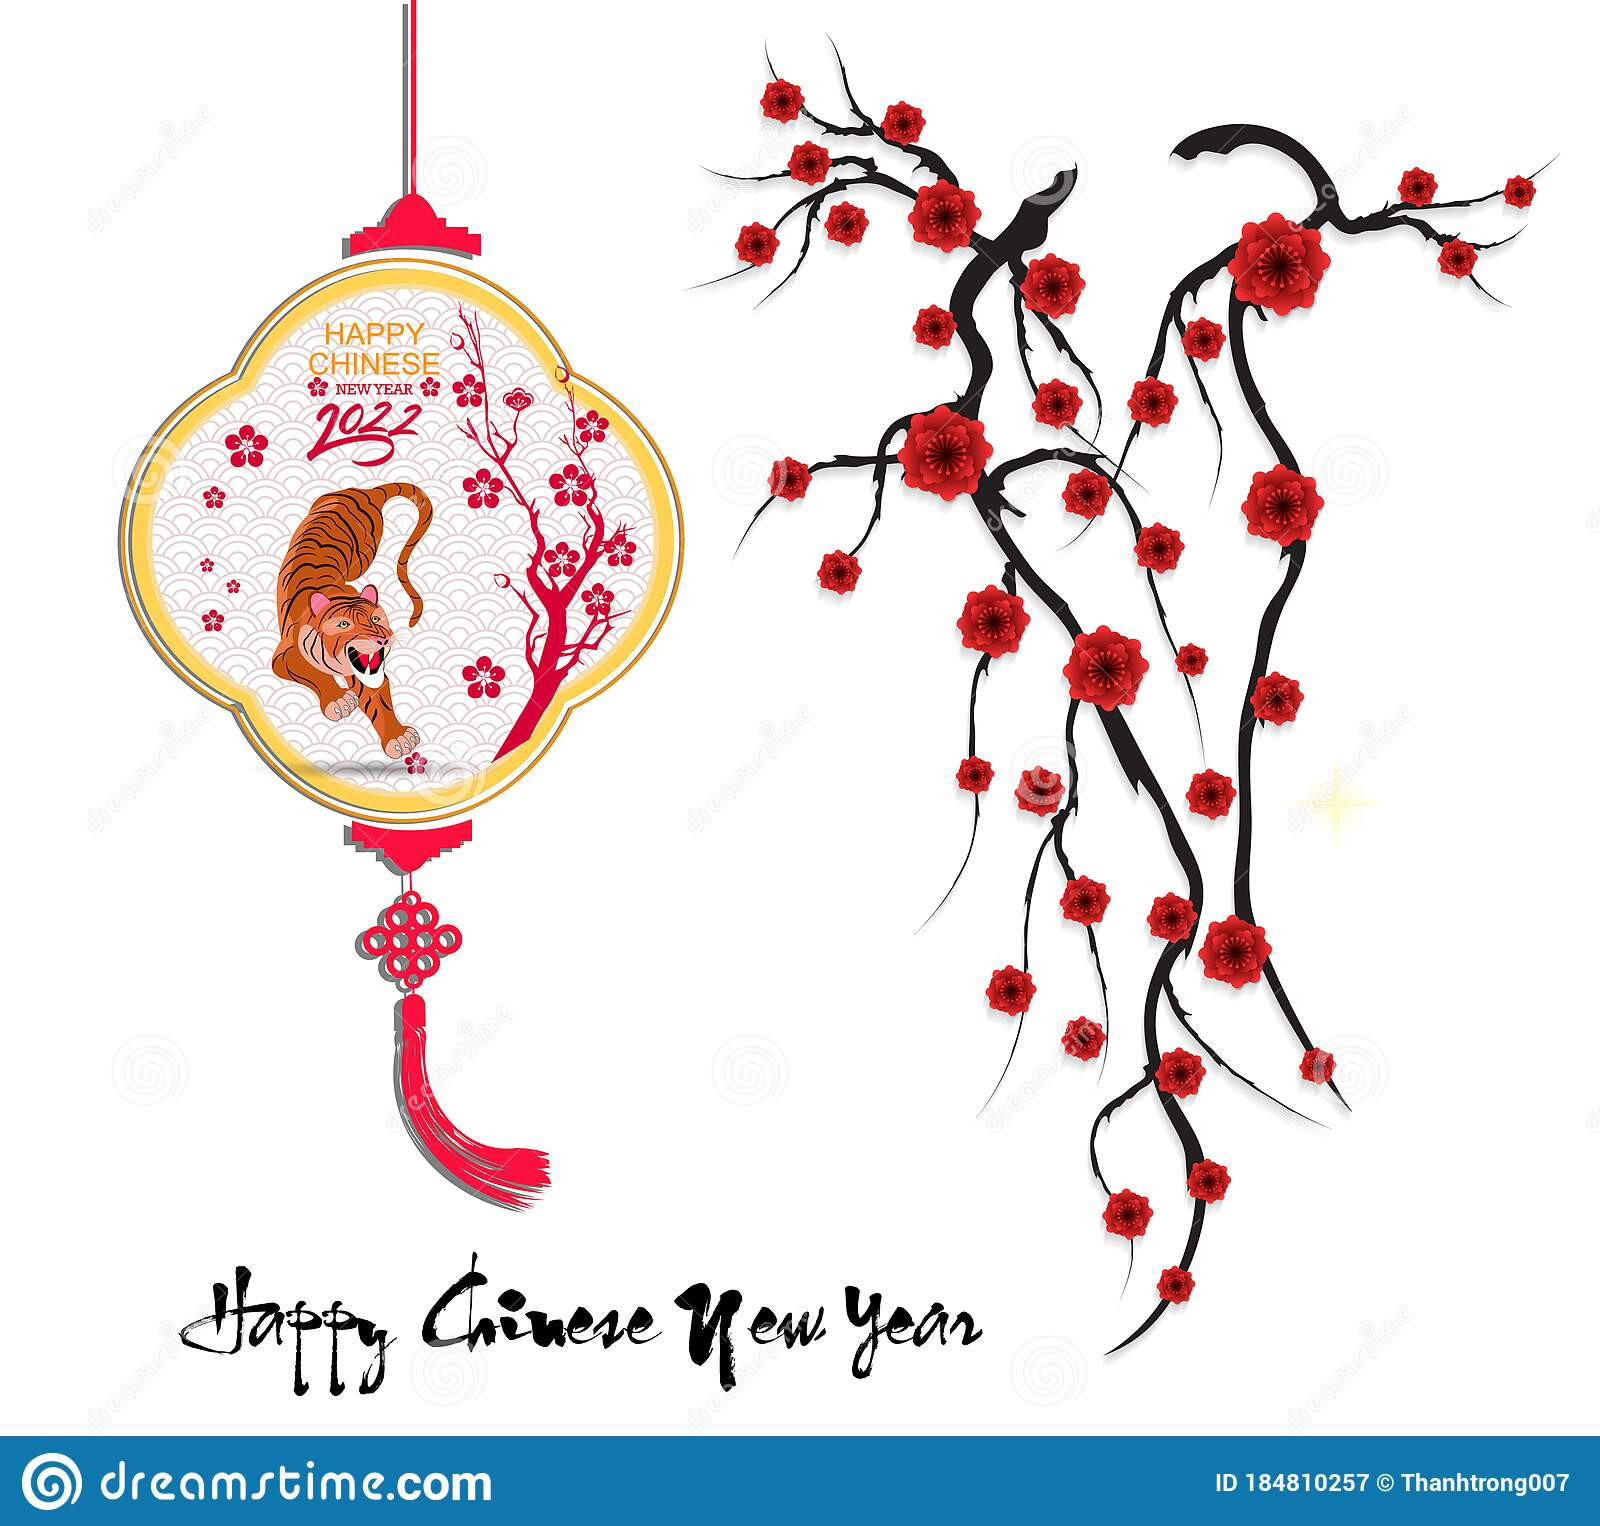 Chinese New Year 2022 - Year Of The Tiger. Lunar New Year Banner Design-Calendar 2022 Chinese New Year